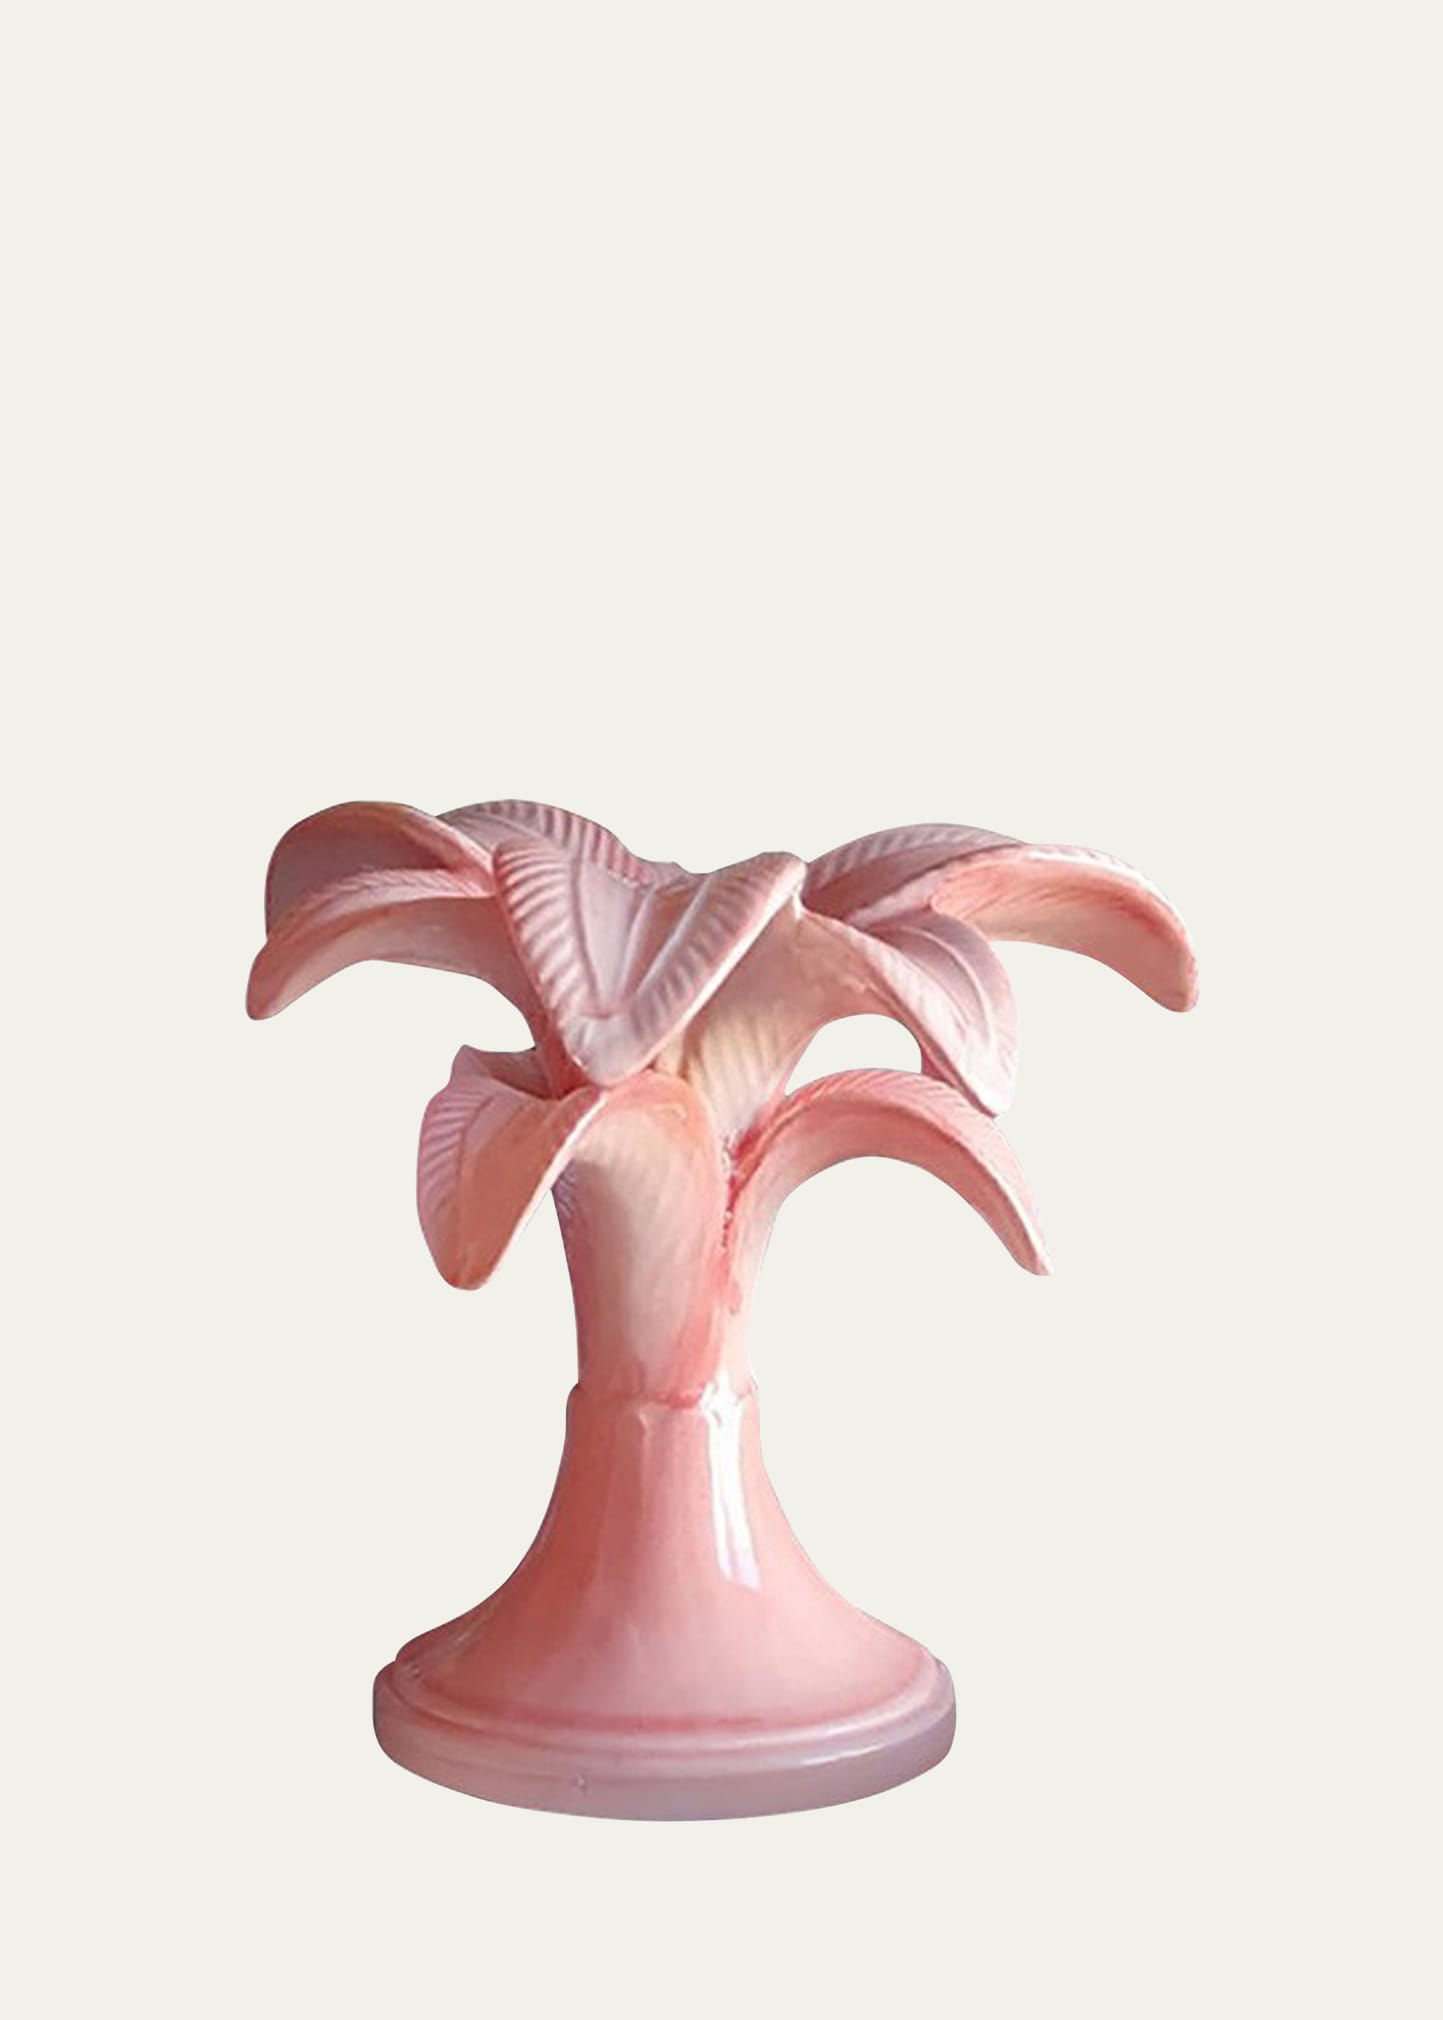 Les Ottomans Palm Candle Holder, Pink - 5.3"